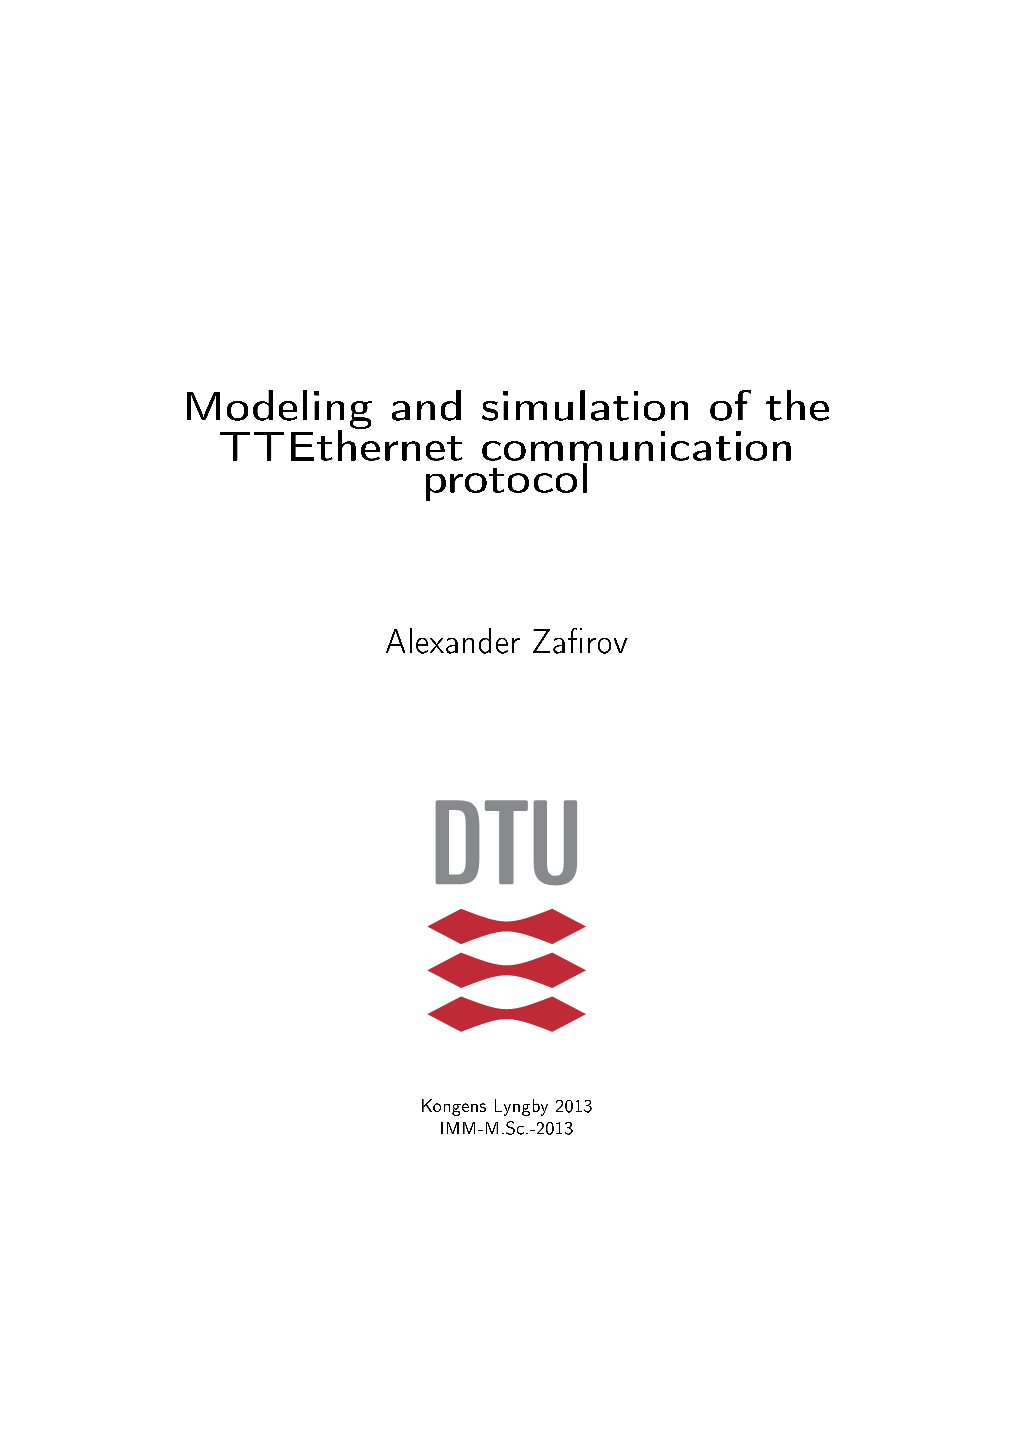 Modeling and Simulation of the Ttethernet Communication Protocol